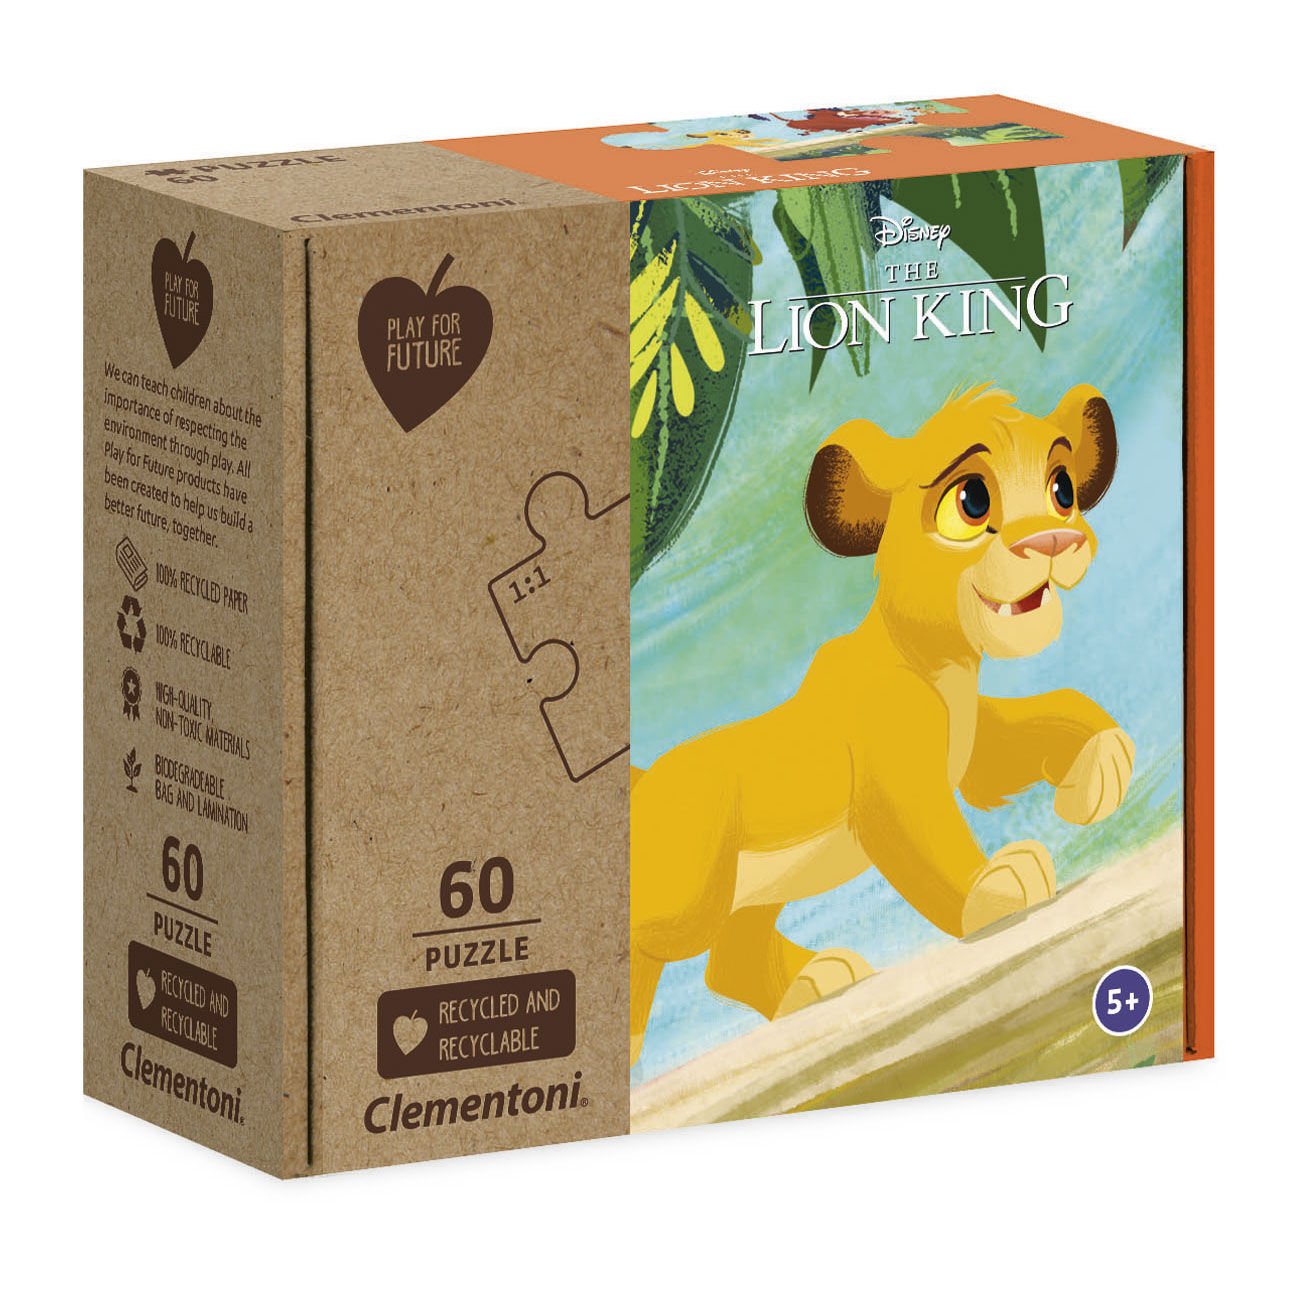 Clementoni Play for Future Puzzel - Lion King, 60st.